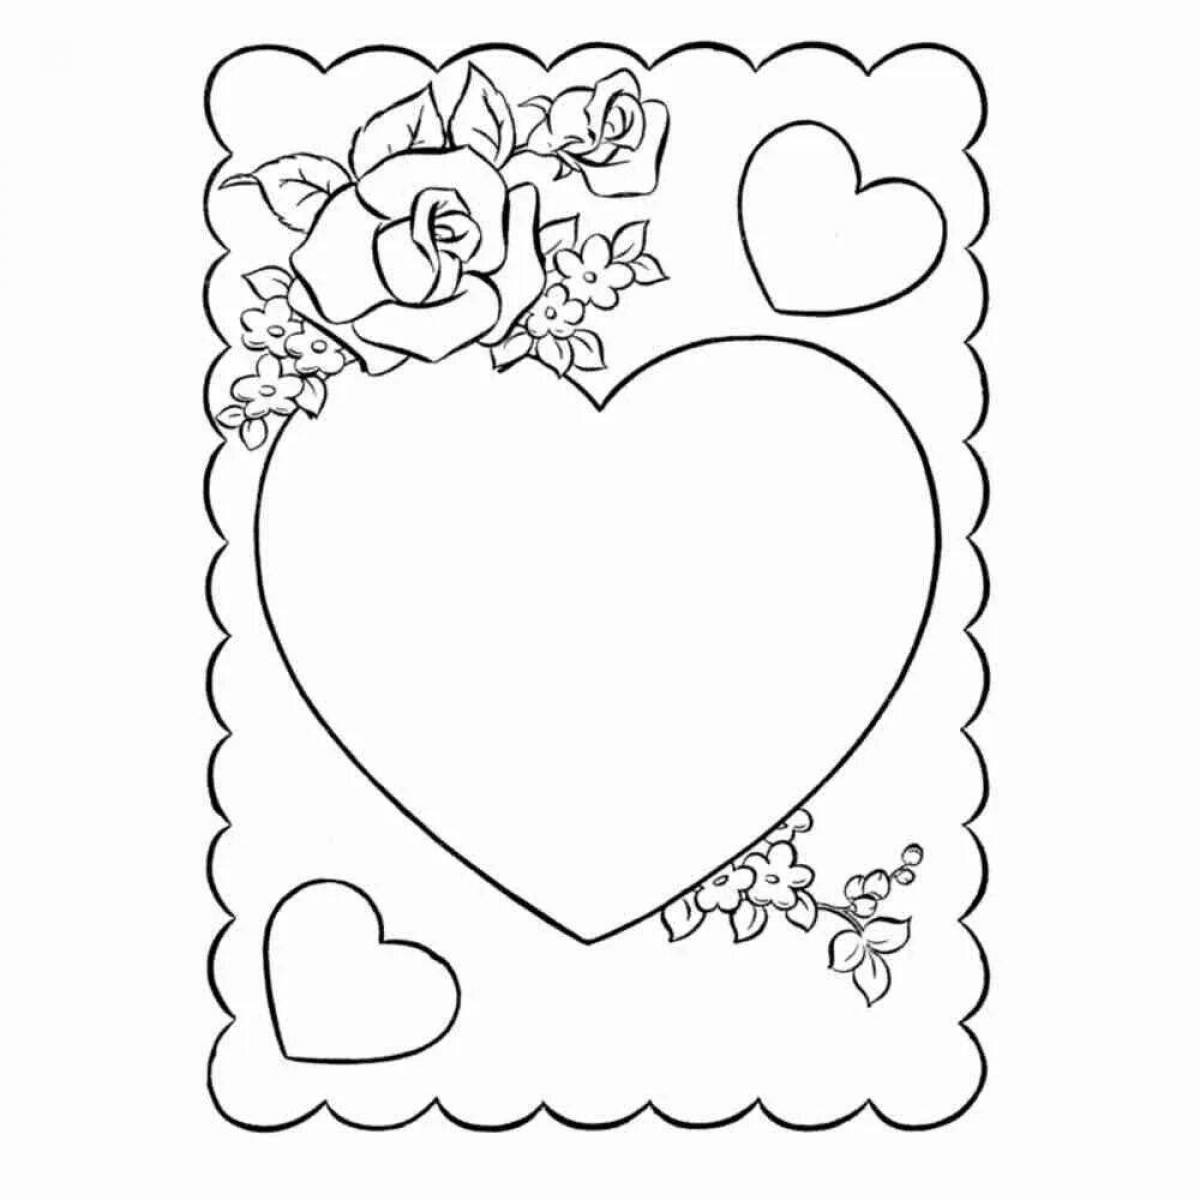 February 14 funny coloring book